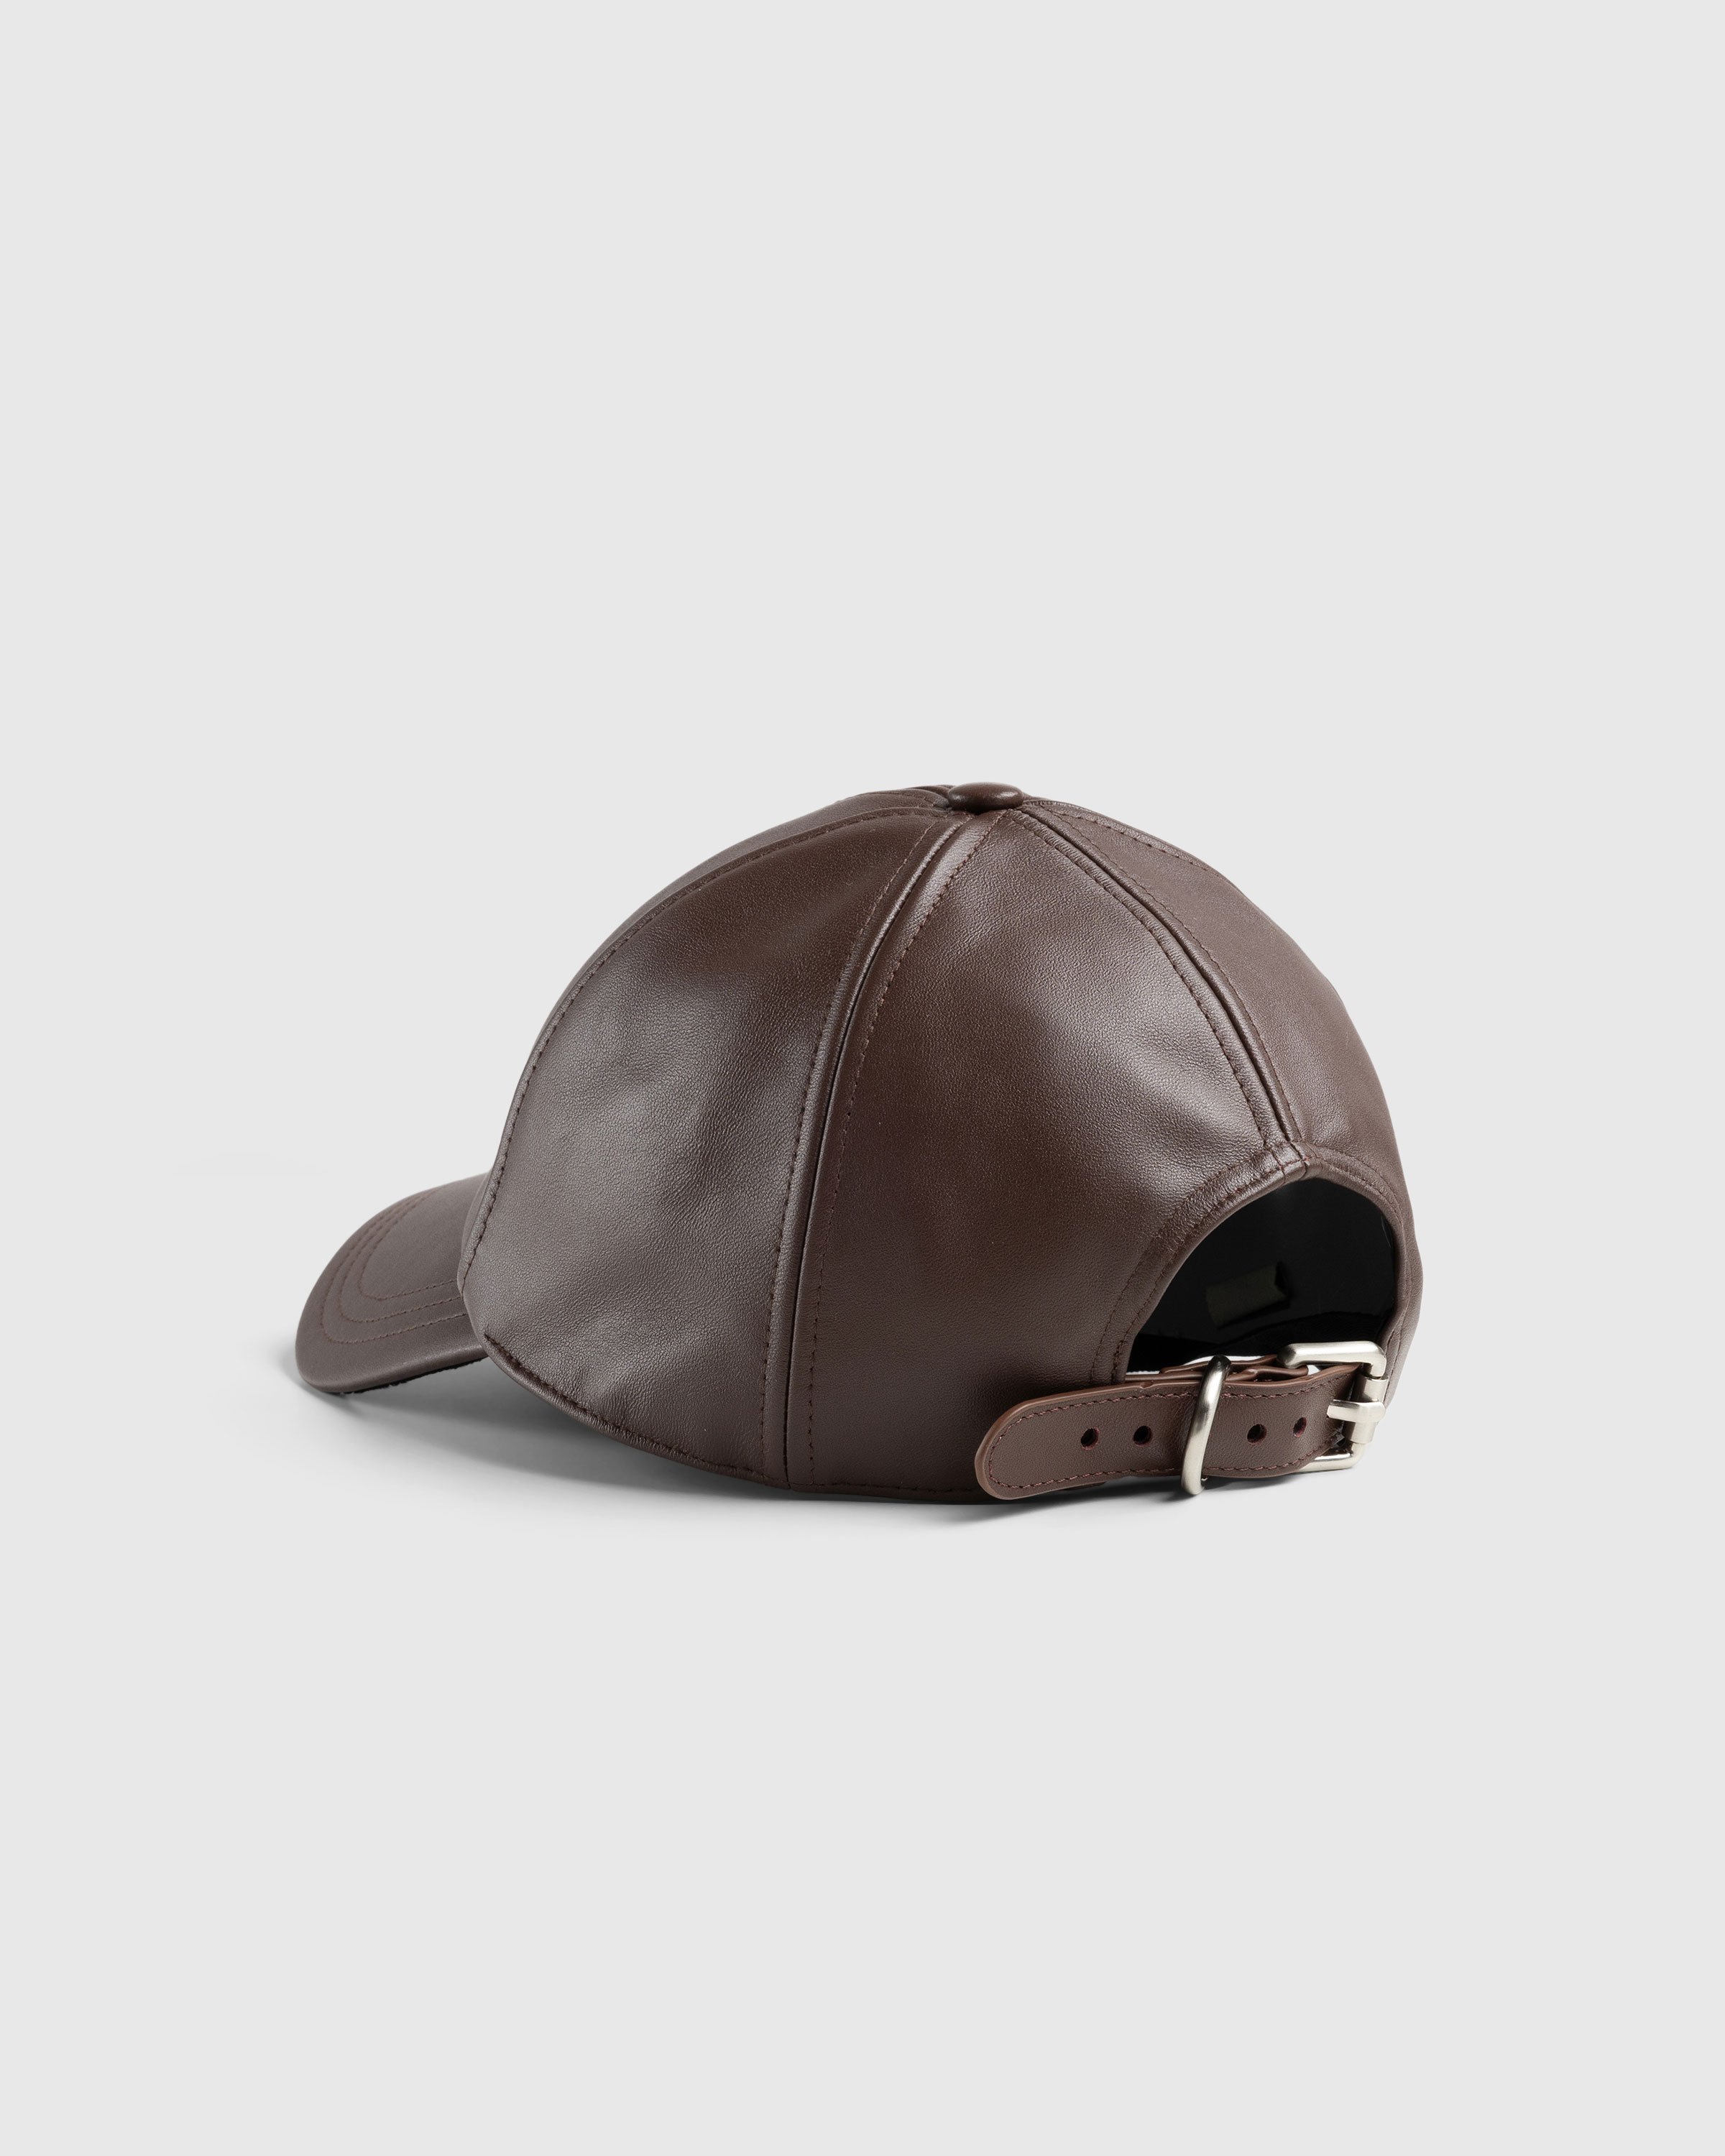 J.W. Anderson - Leather Baseball Cap Brown - Accessories - Brown - Image 3